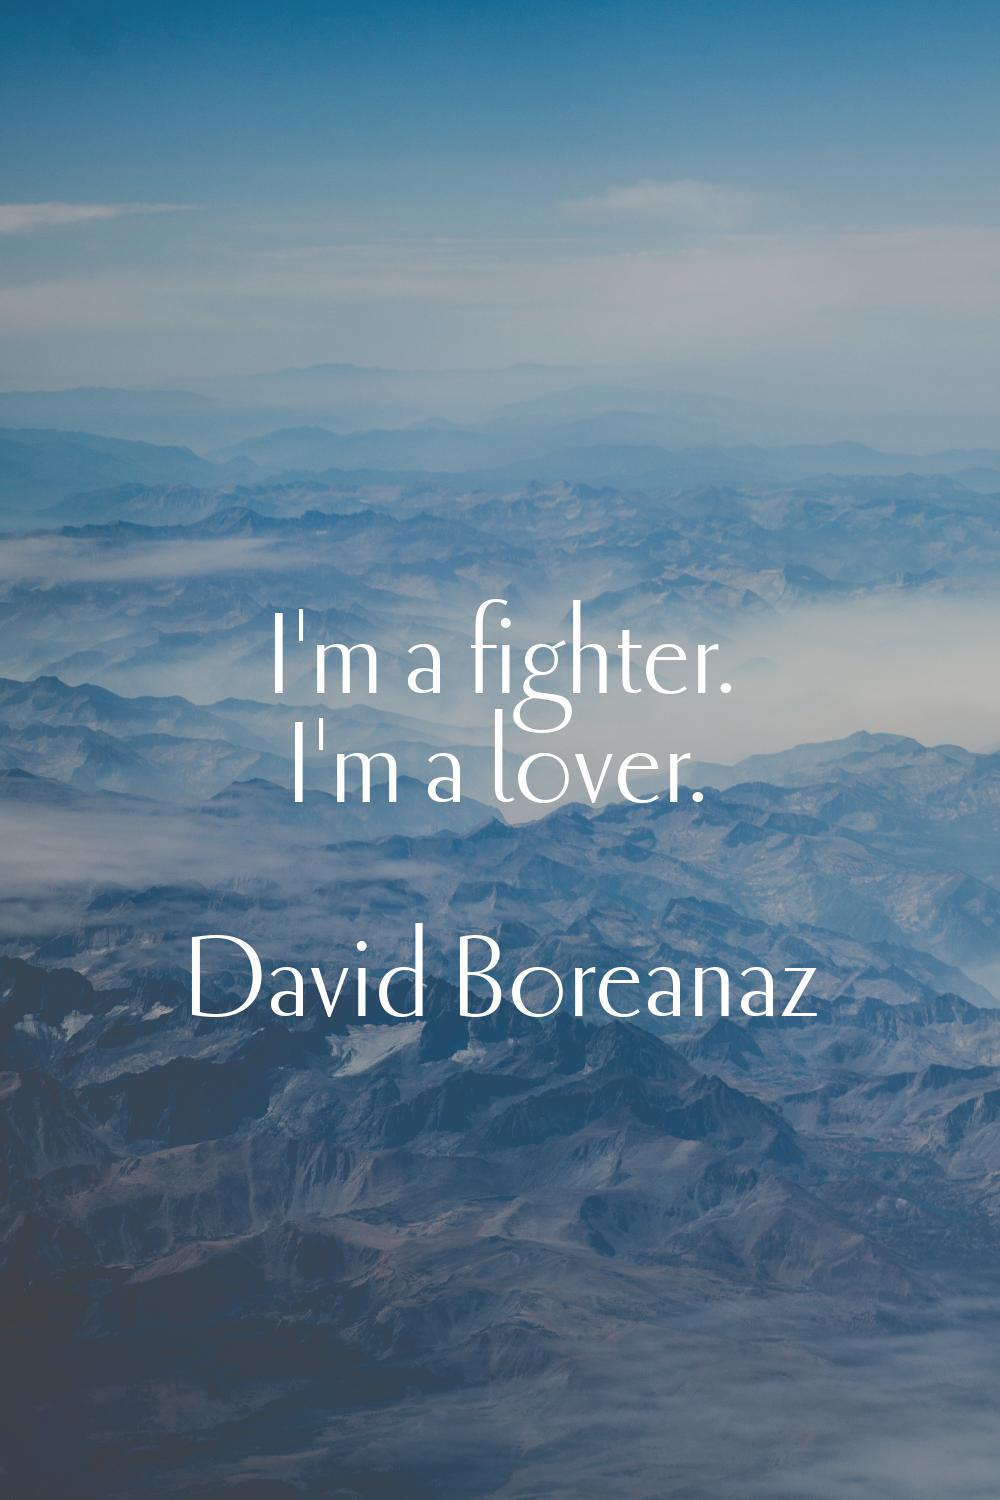 I'm a fighter. I'm a lover.